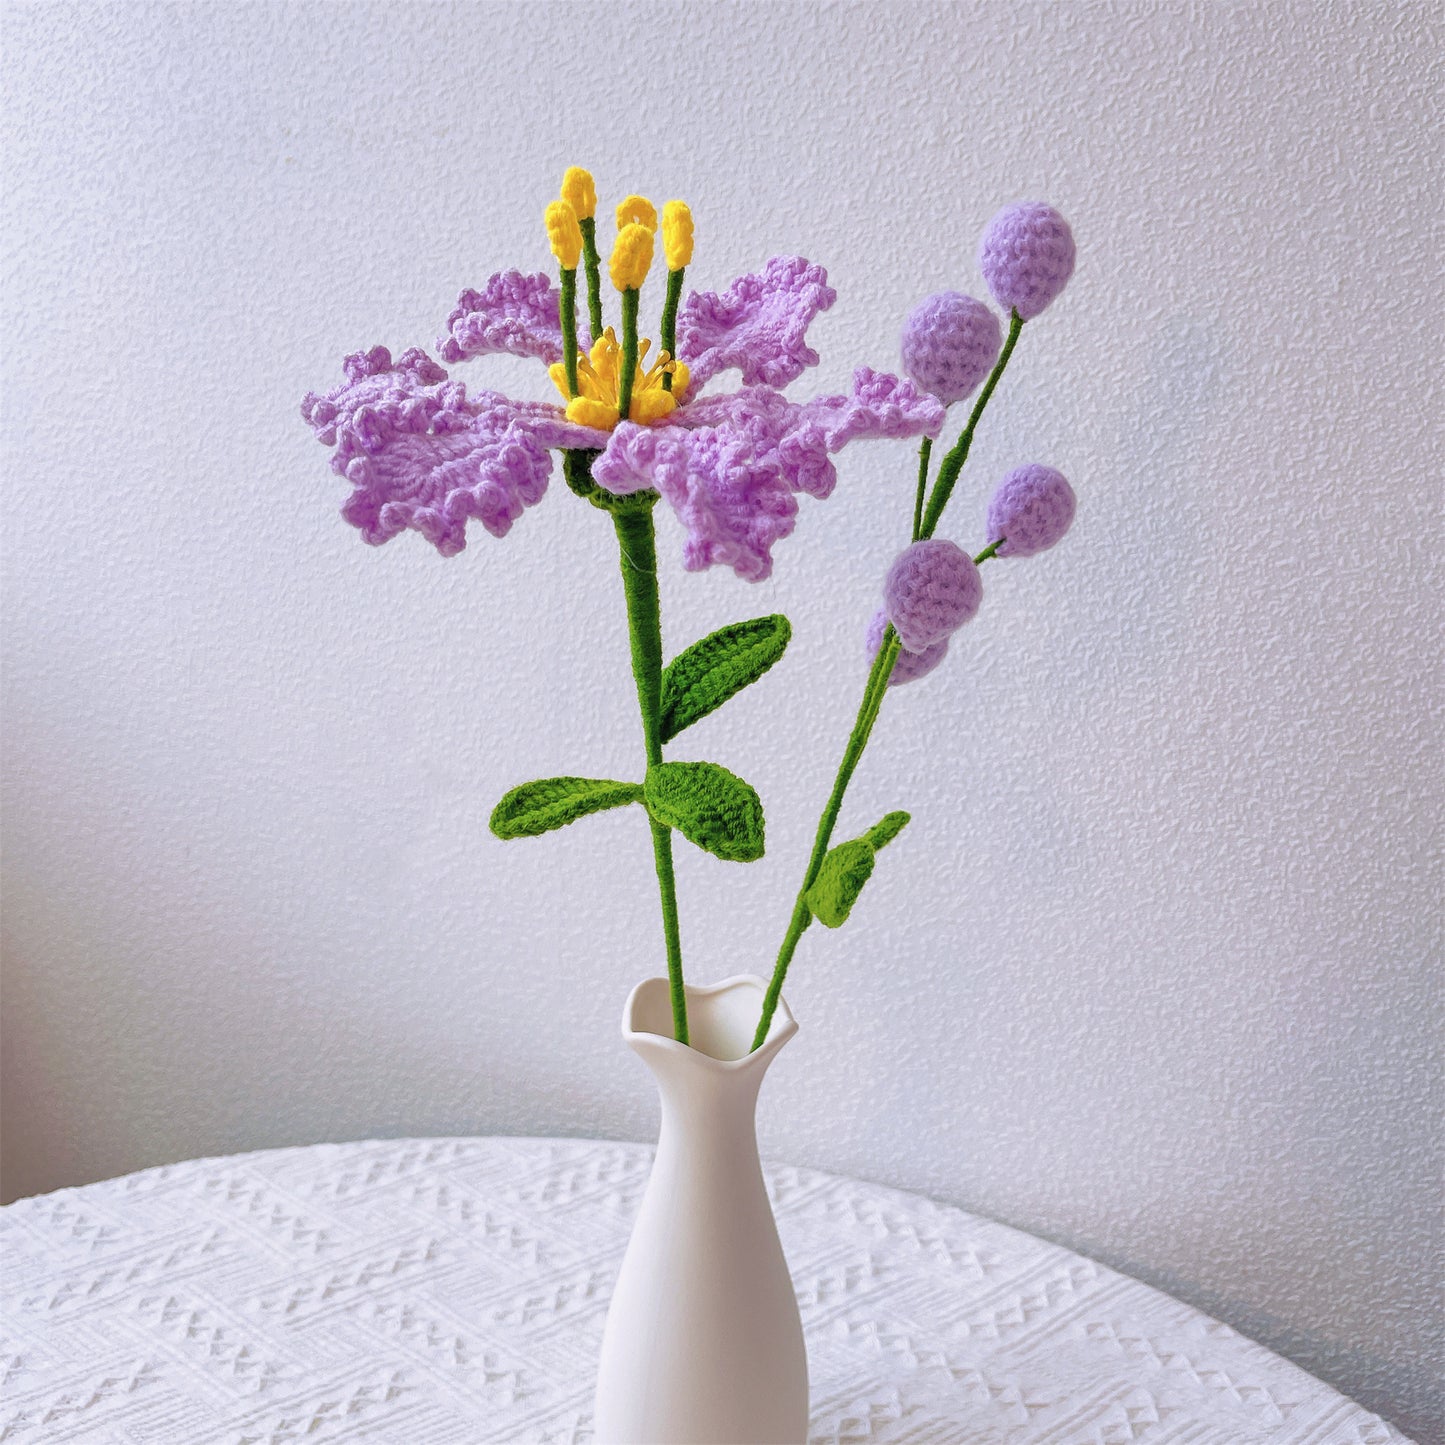 Crape Myrtle Charm: Handcrafted Crochet Crape Myrtle Flower Stake for a Colorful Garden Decor